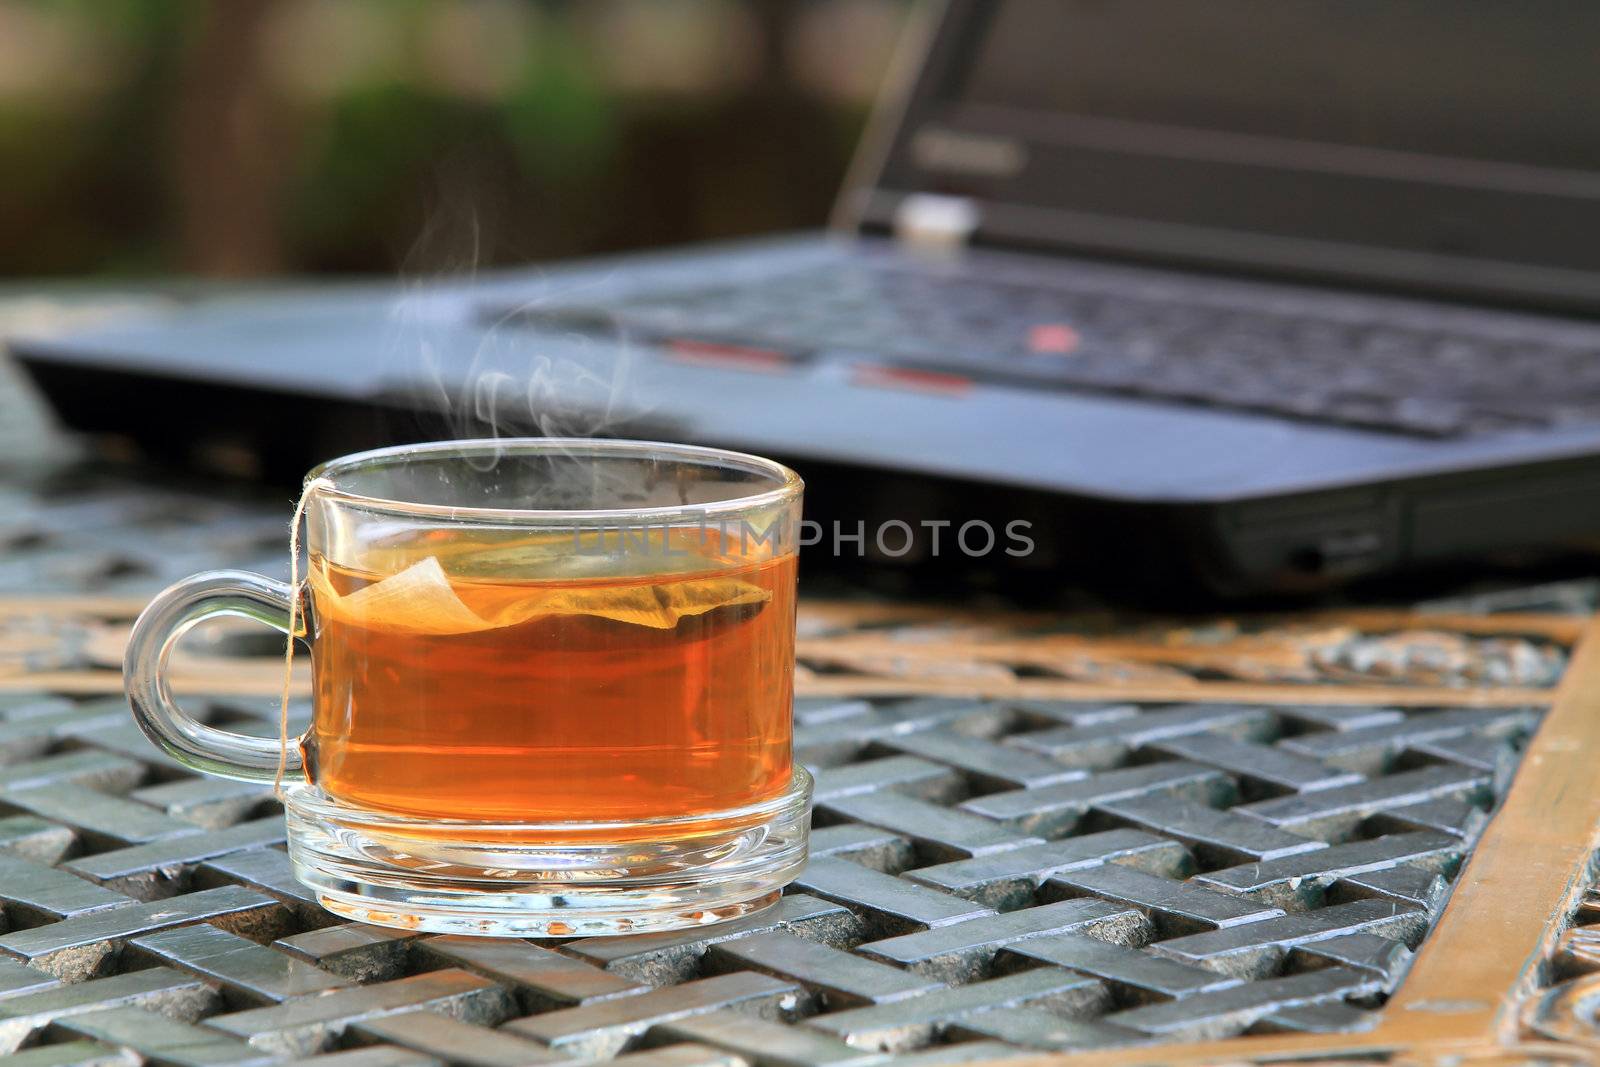 Laptop keyboard and tea cup